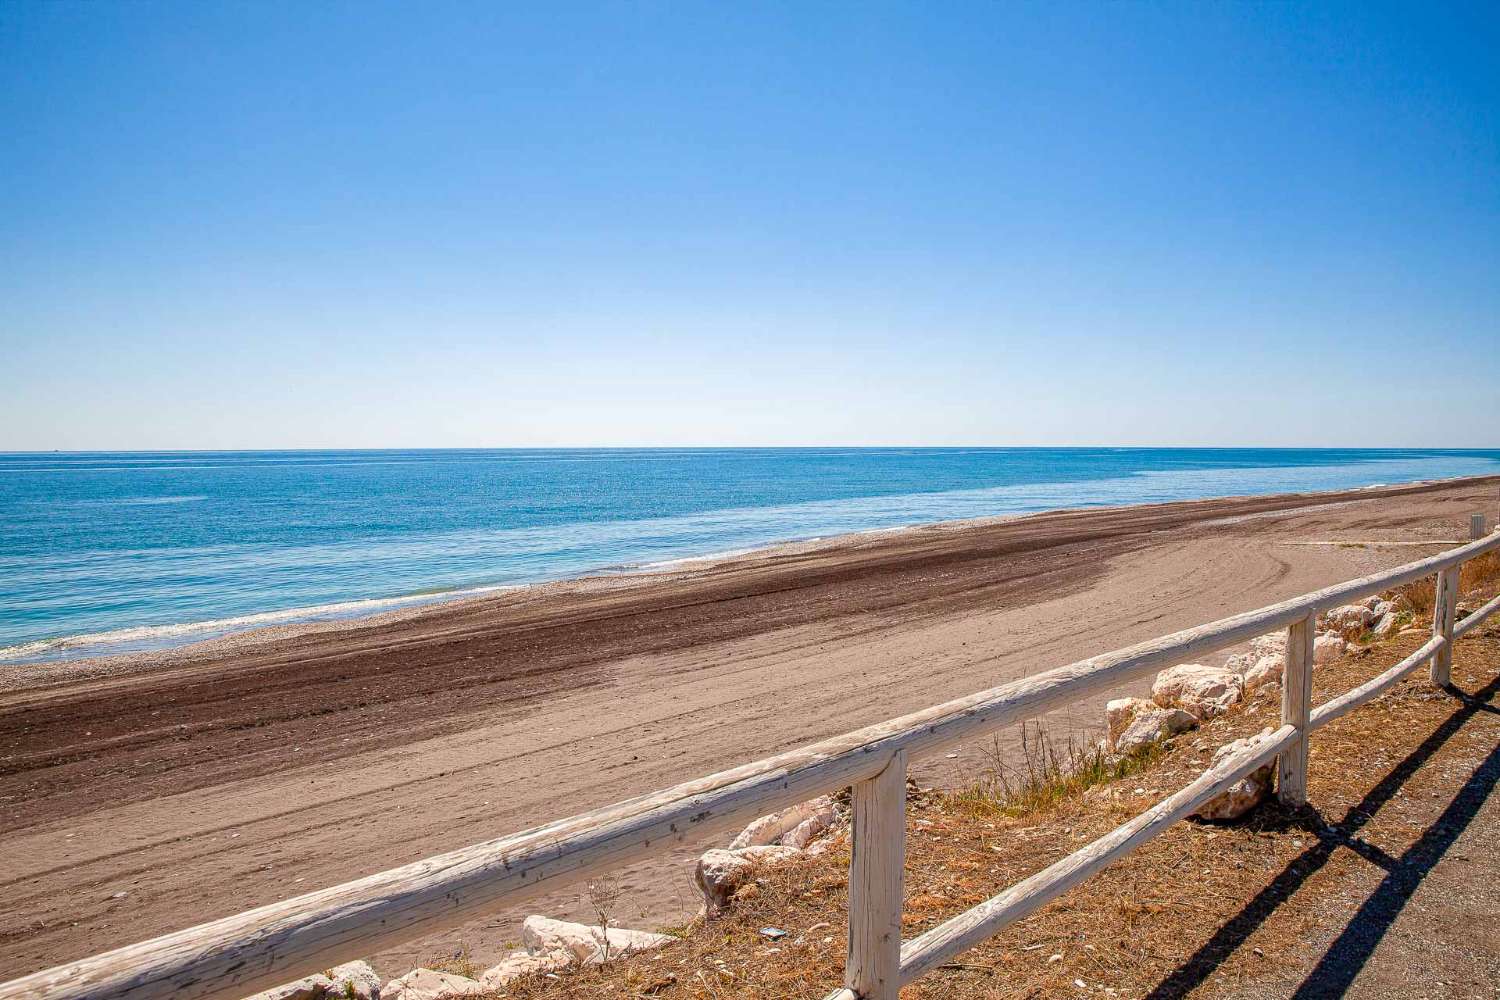 COmplejo ready to live for sale on torrox coast with stunning sea views